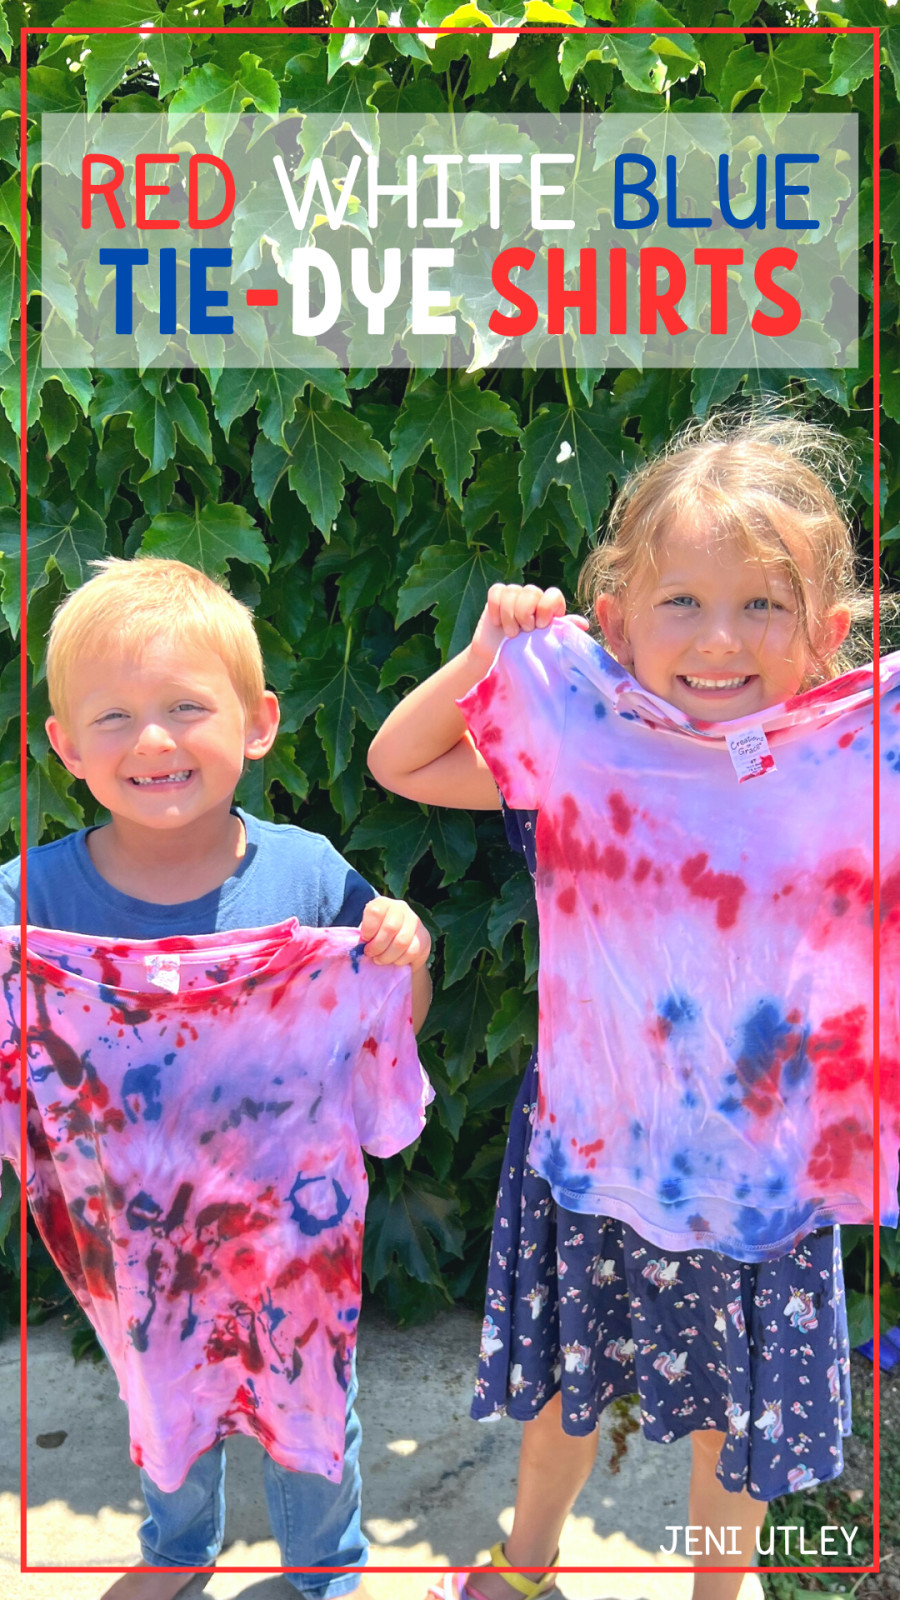 TIE-DYING WITH PRESCHOOLERS AND LEARNING ABOUT THE 4TH OF JULY